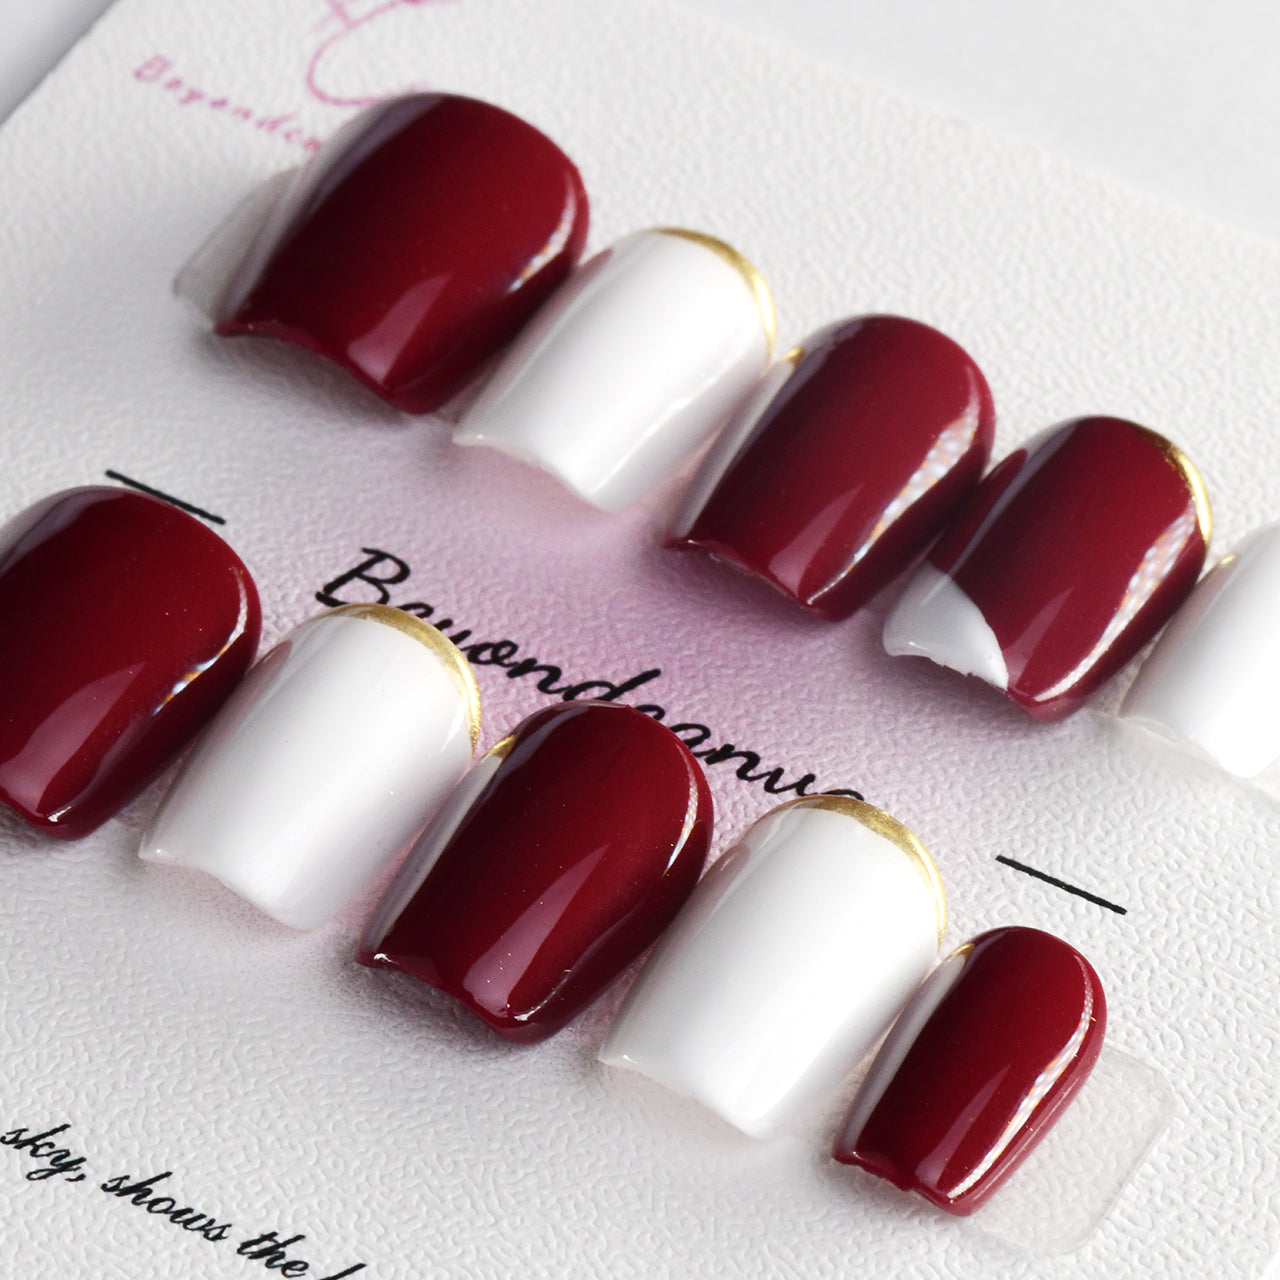 Classy Red Short Coffin Glossy Handmade Press On Nails With Colorblock BEYONDCANVA